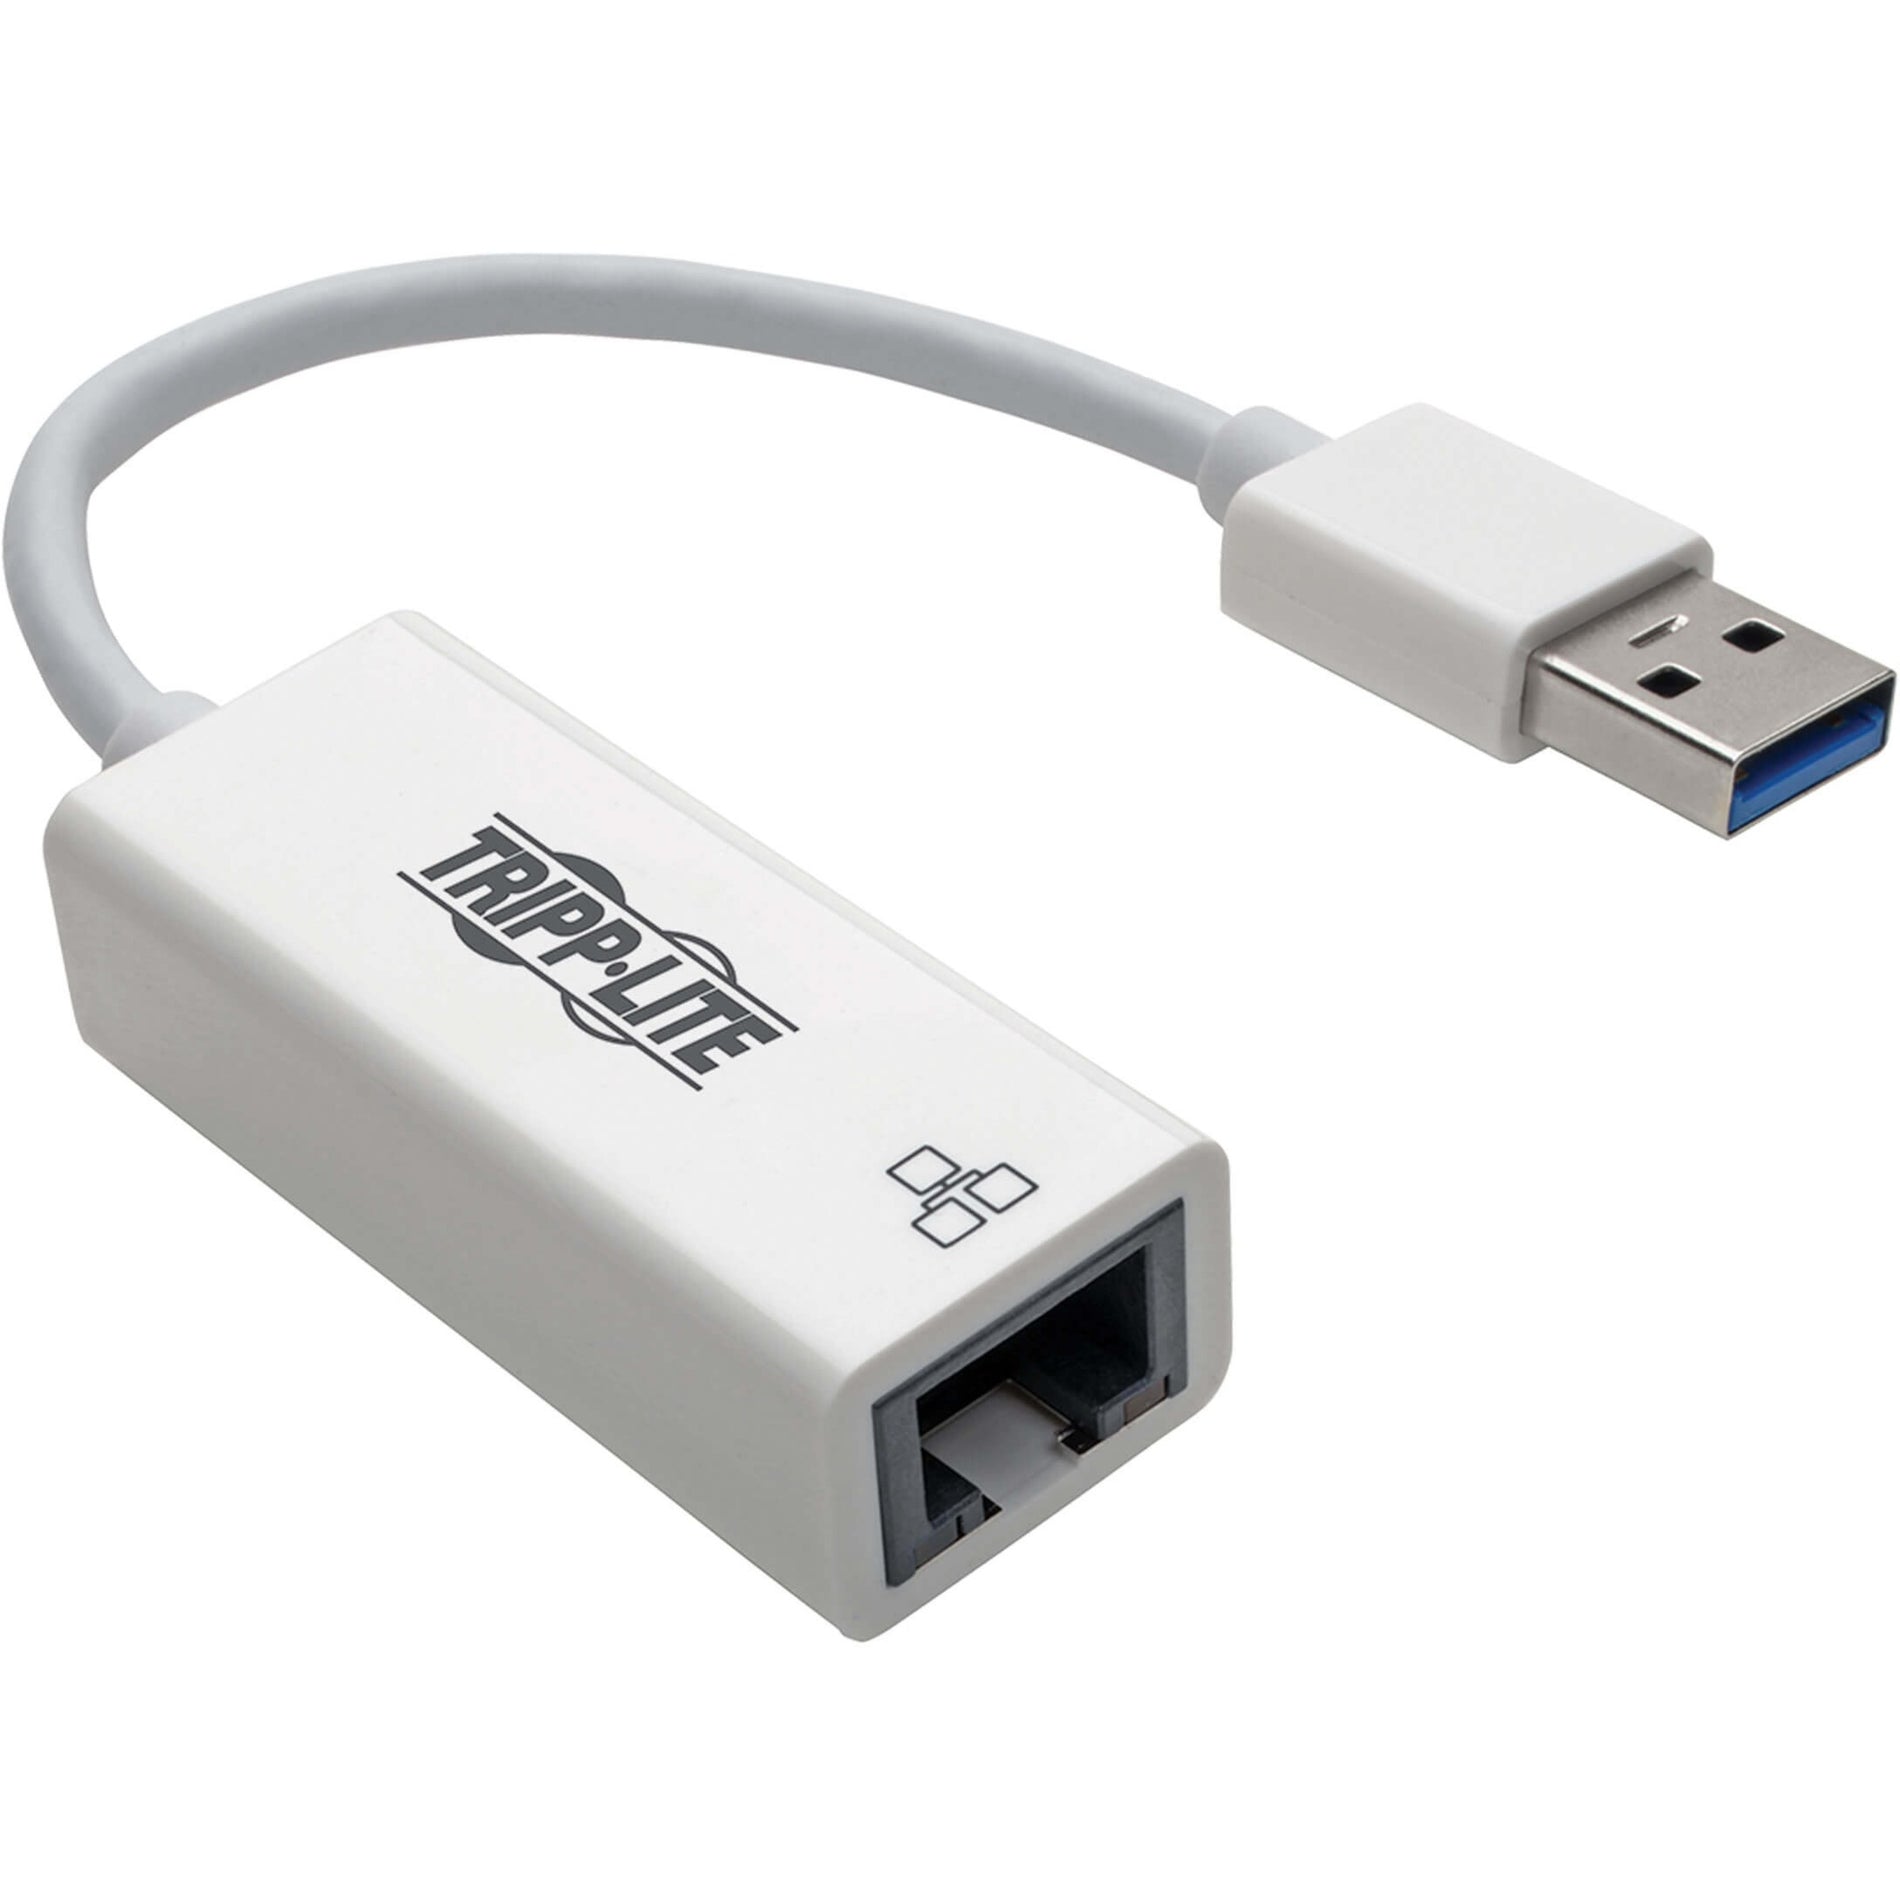 Tripp Lite U336-000-GBW USB 3.0 SuperSpeed to Gigabit Ethernet NIC Network Adapter, High-Speed Internet Connection for Your Computer